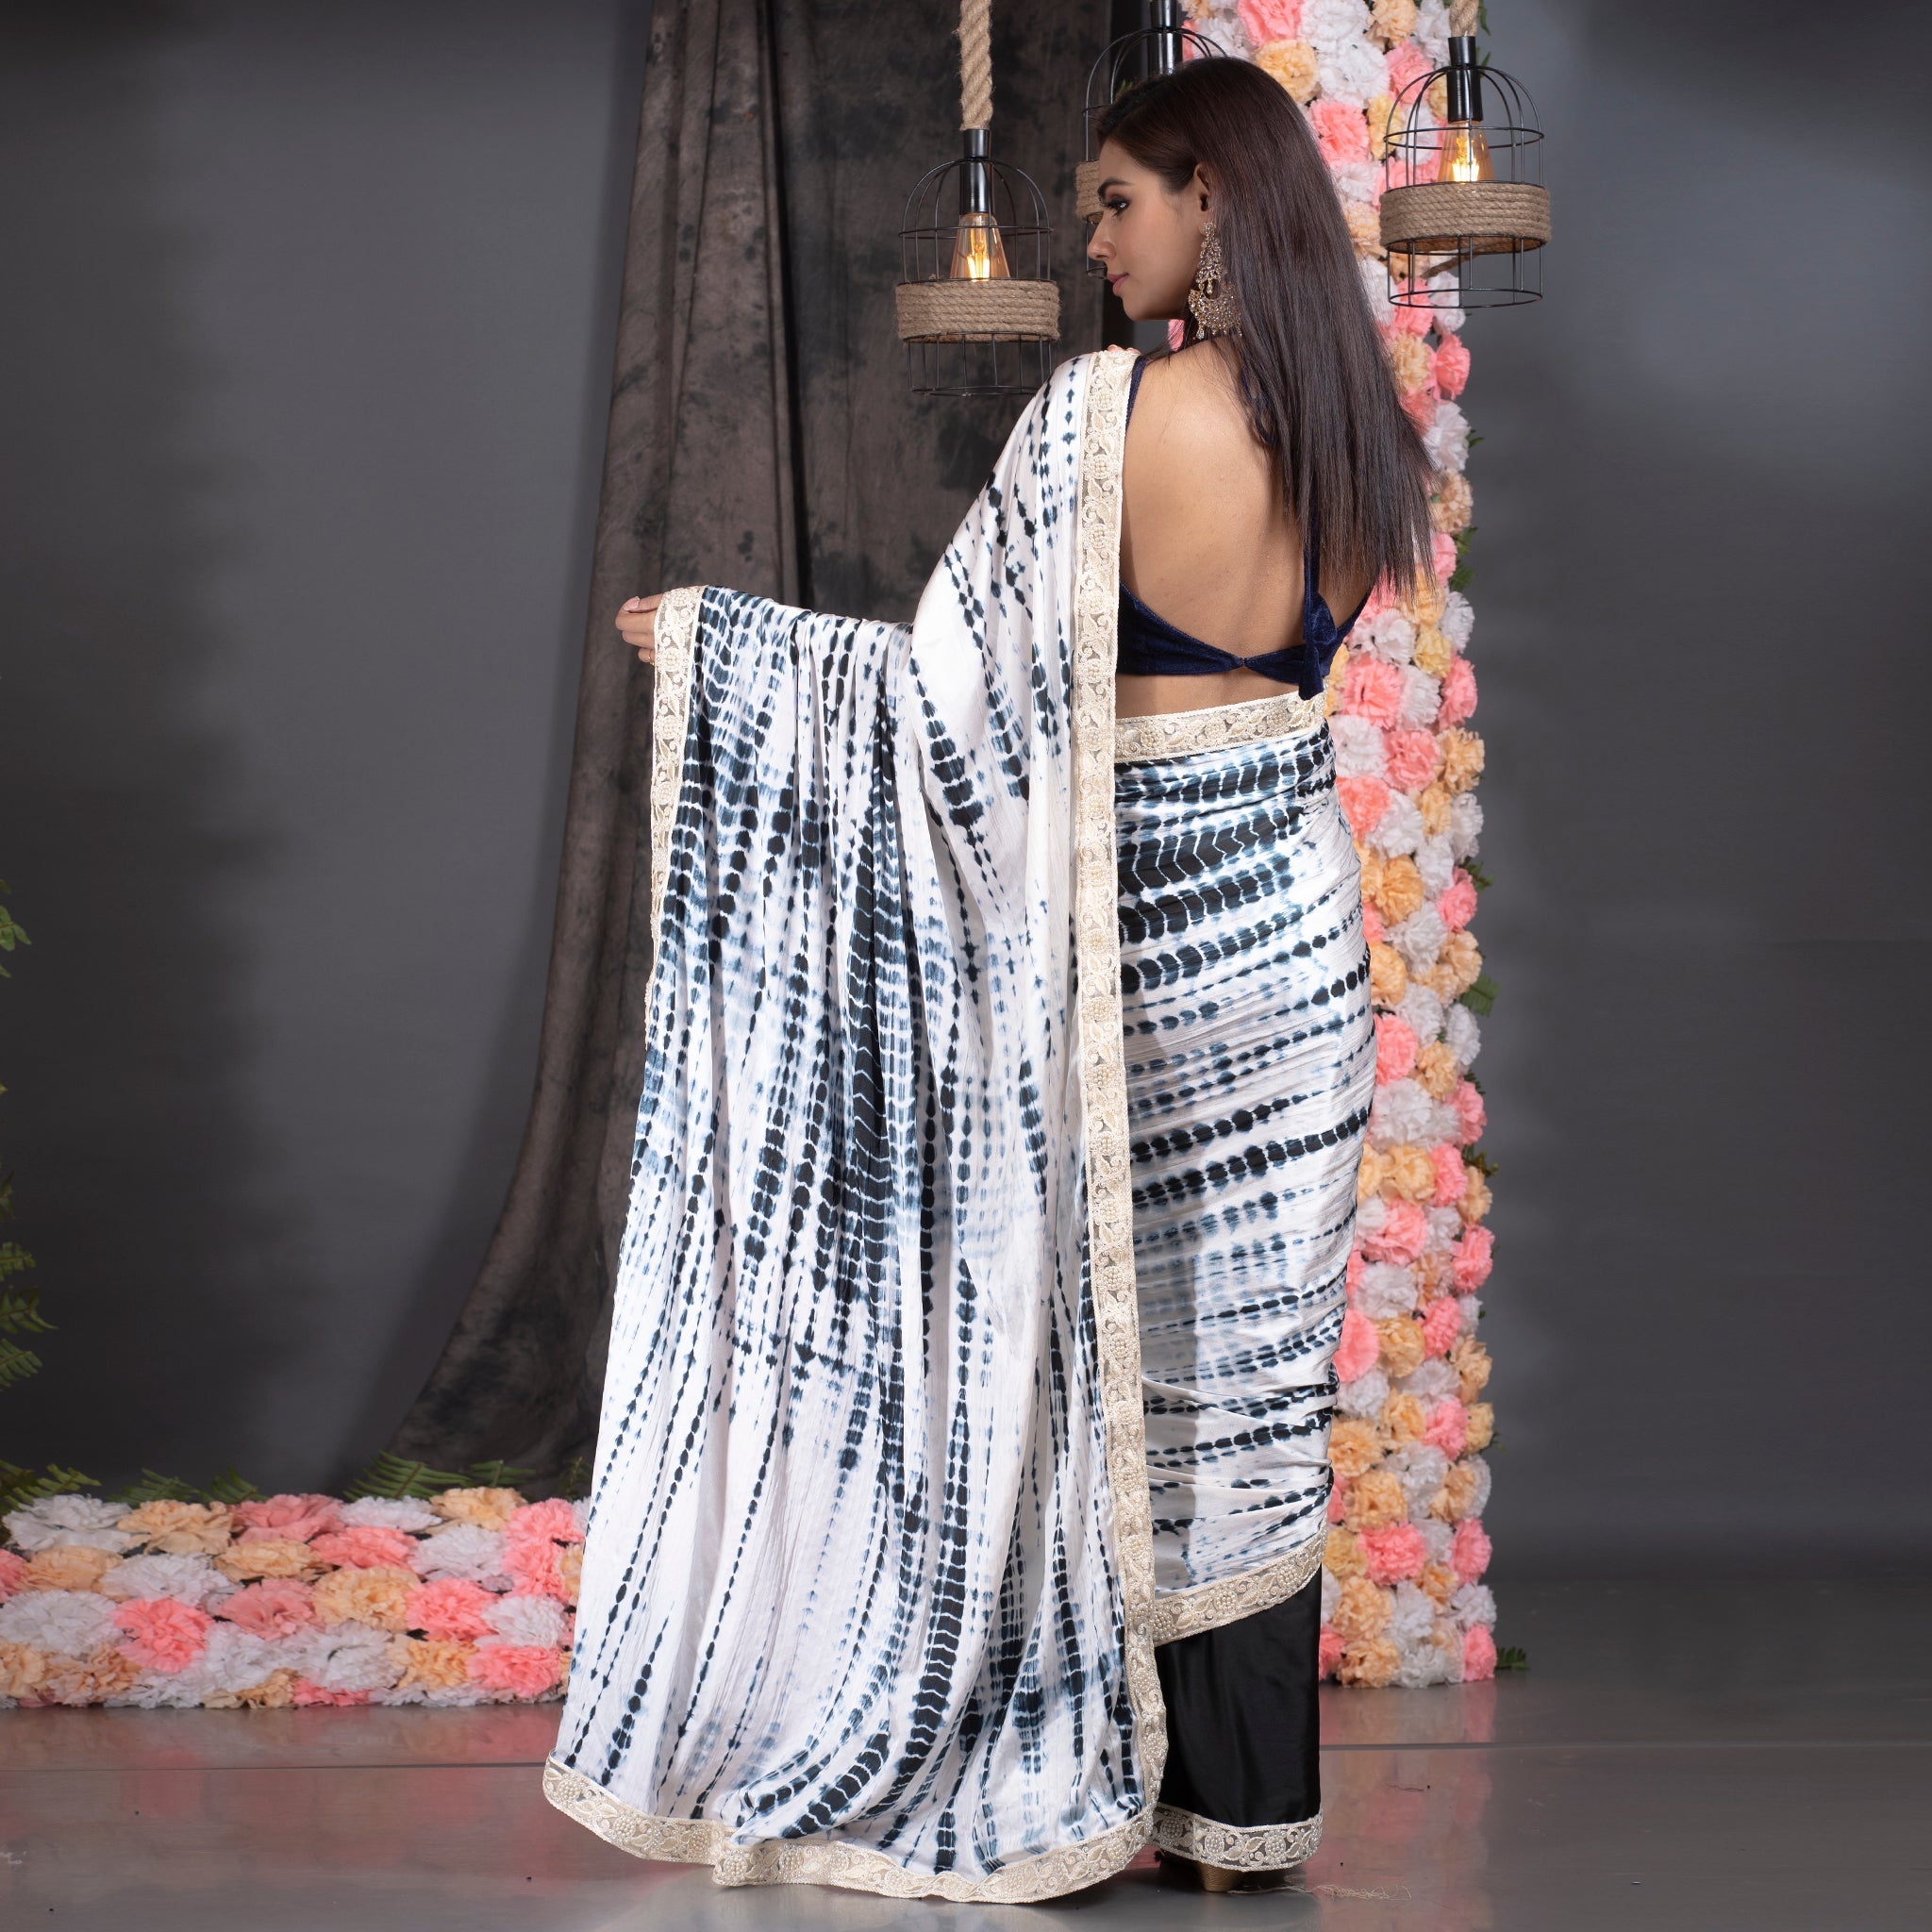 Women's Offwhite With Black Shibori Satin Saree With Pearl Embroidered Lace Border - Boveee